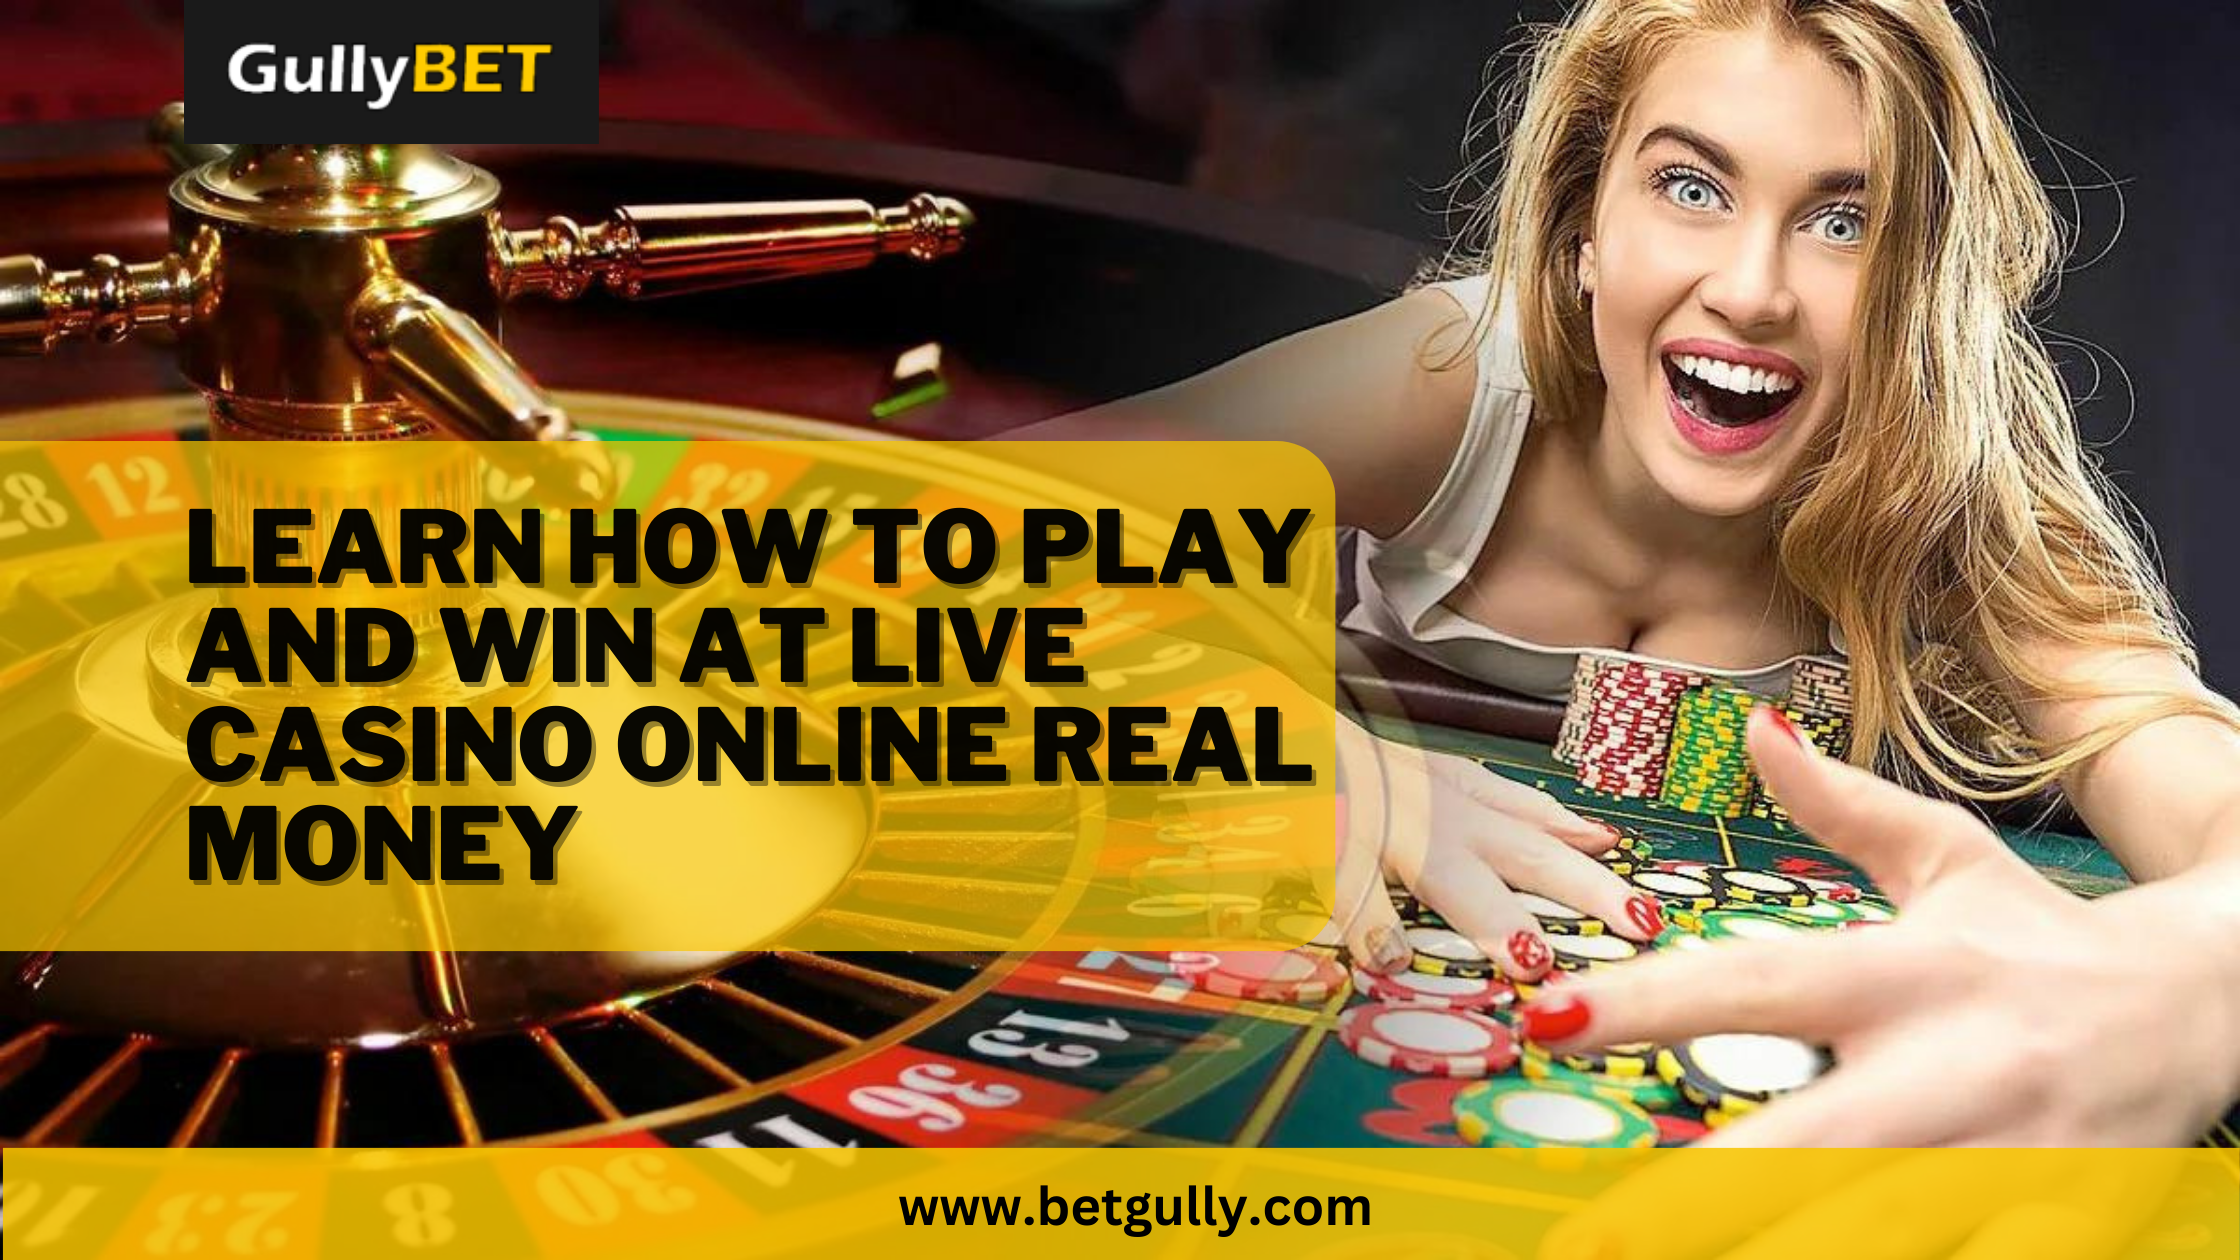 Learn How to Play and Win at Live Casino Online Real Money